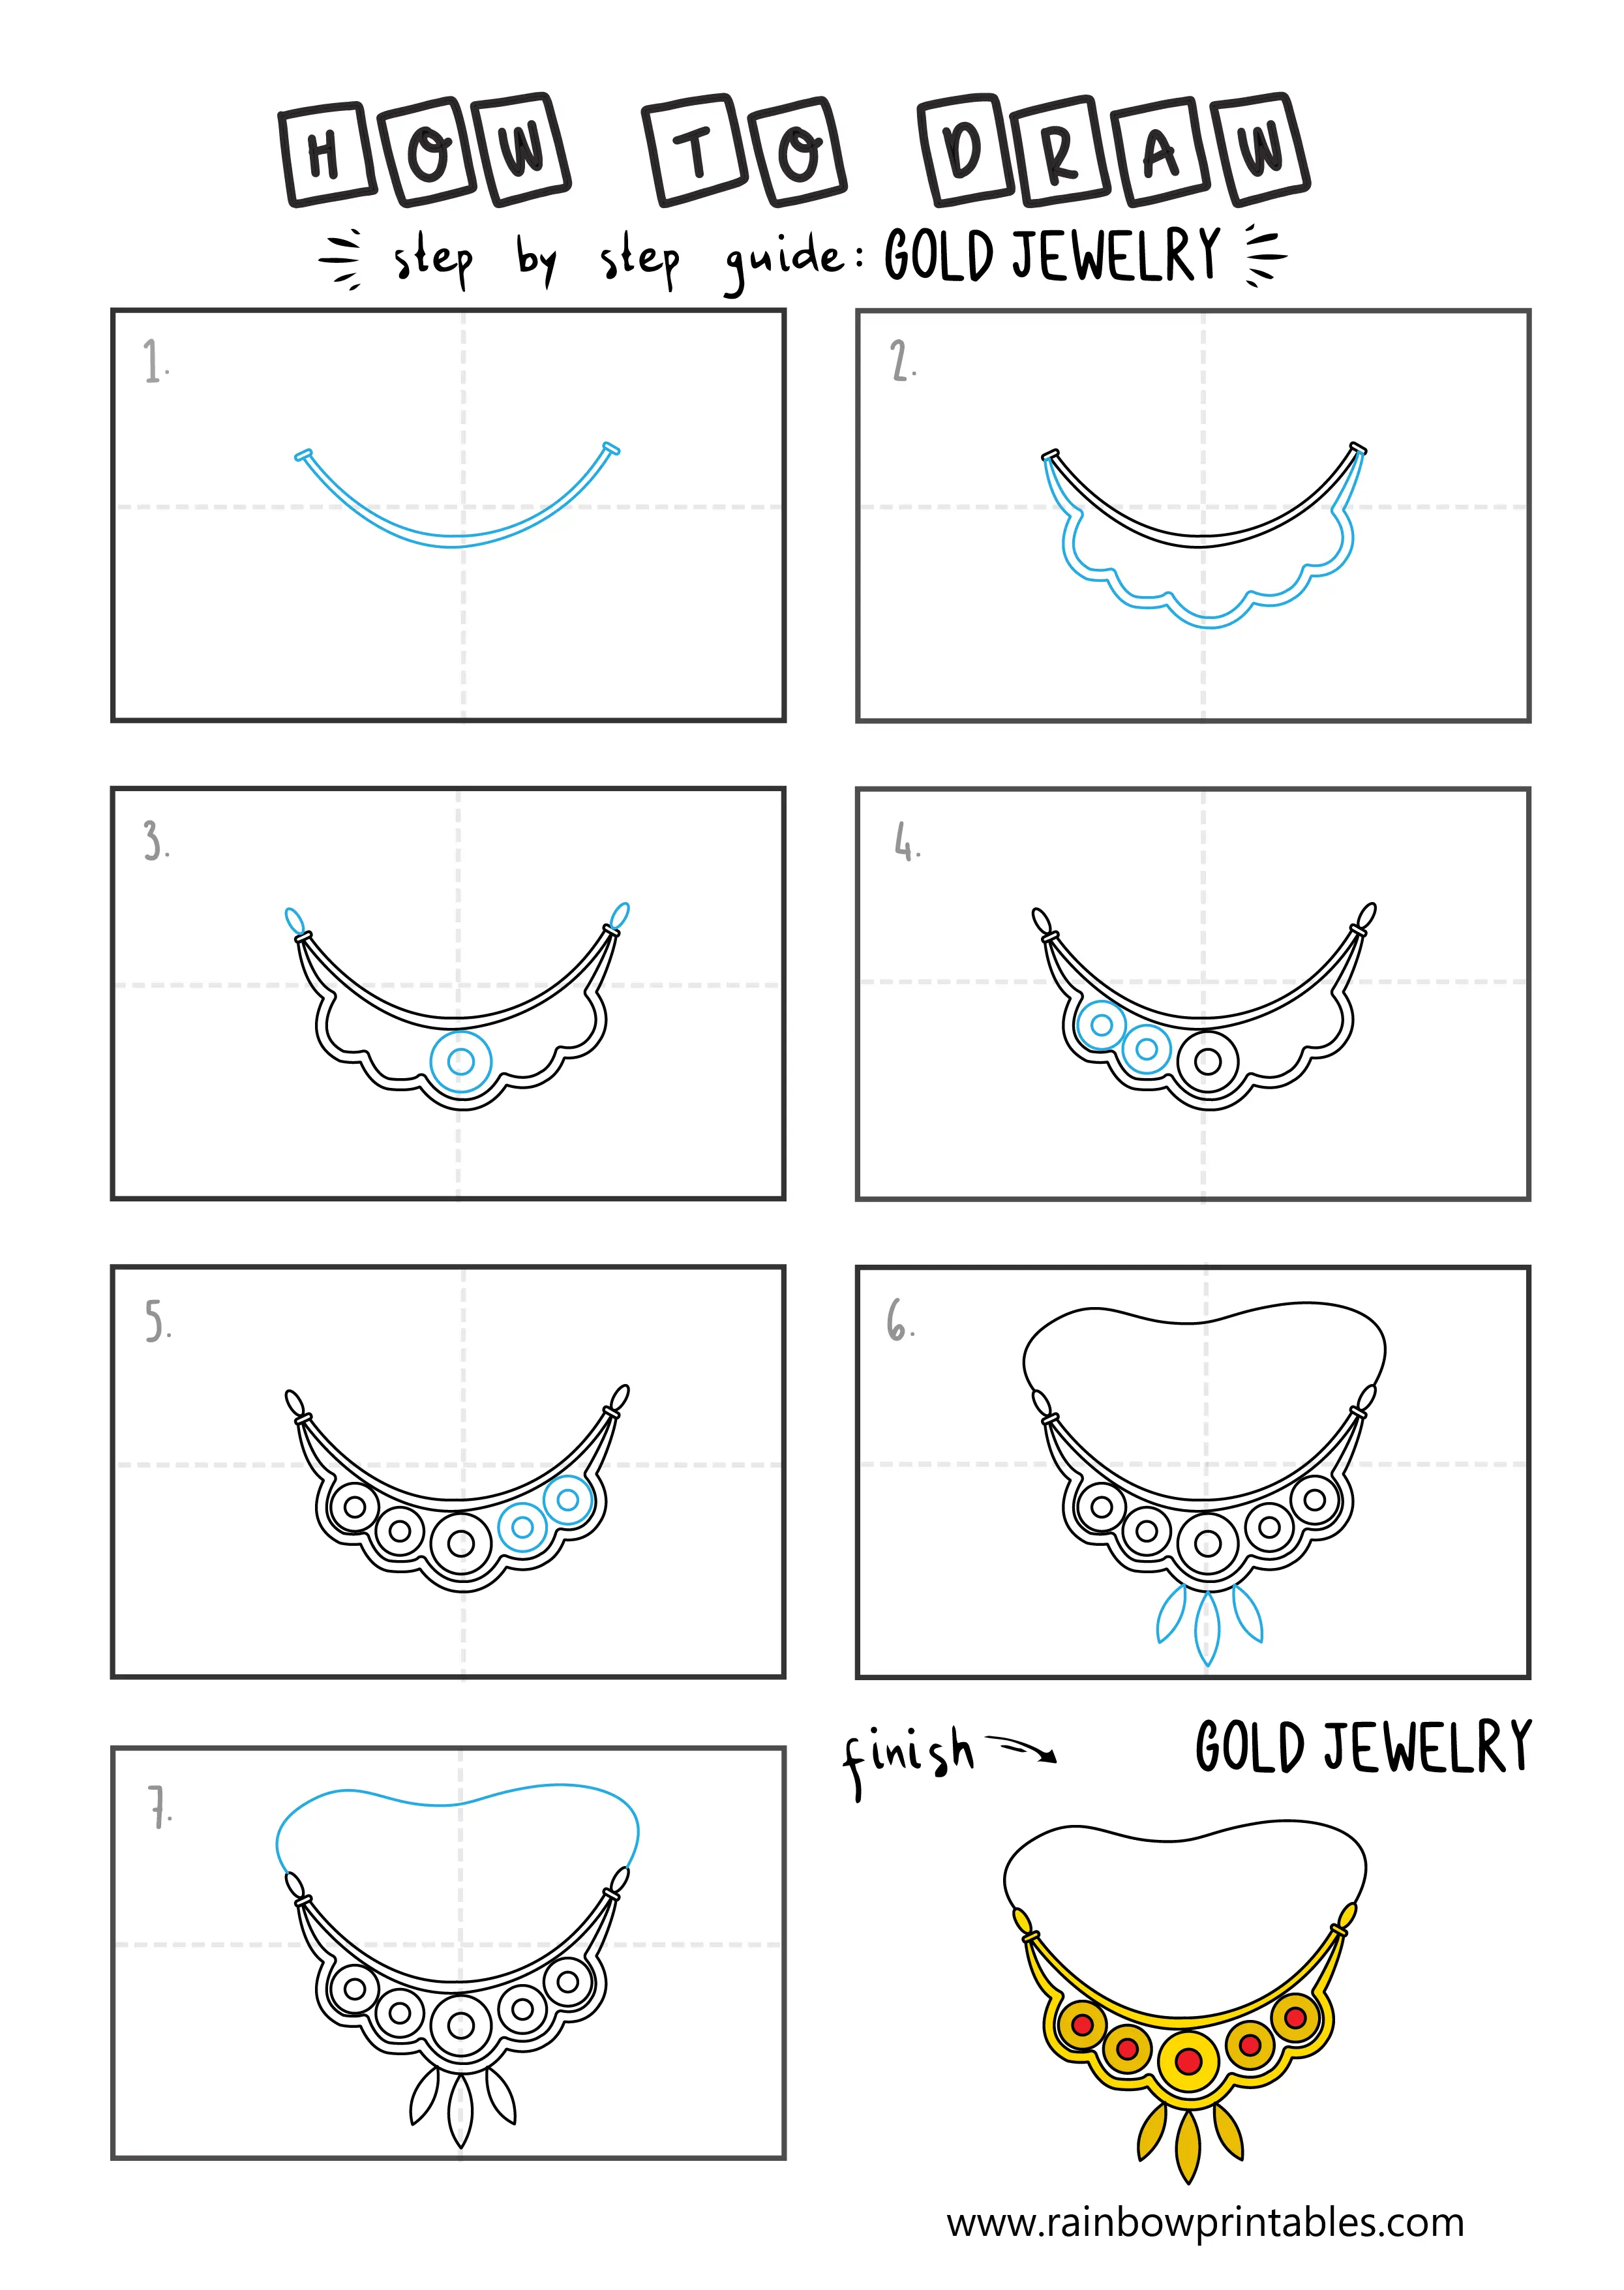 How To Draw a Gold Jewelry Easy Step By Step For Kids Illustration Art Ideas